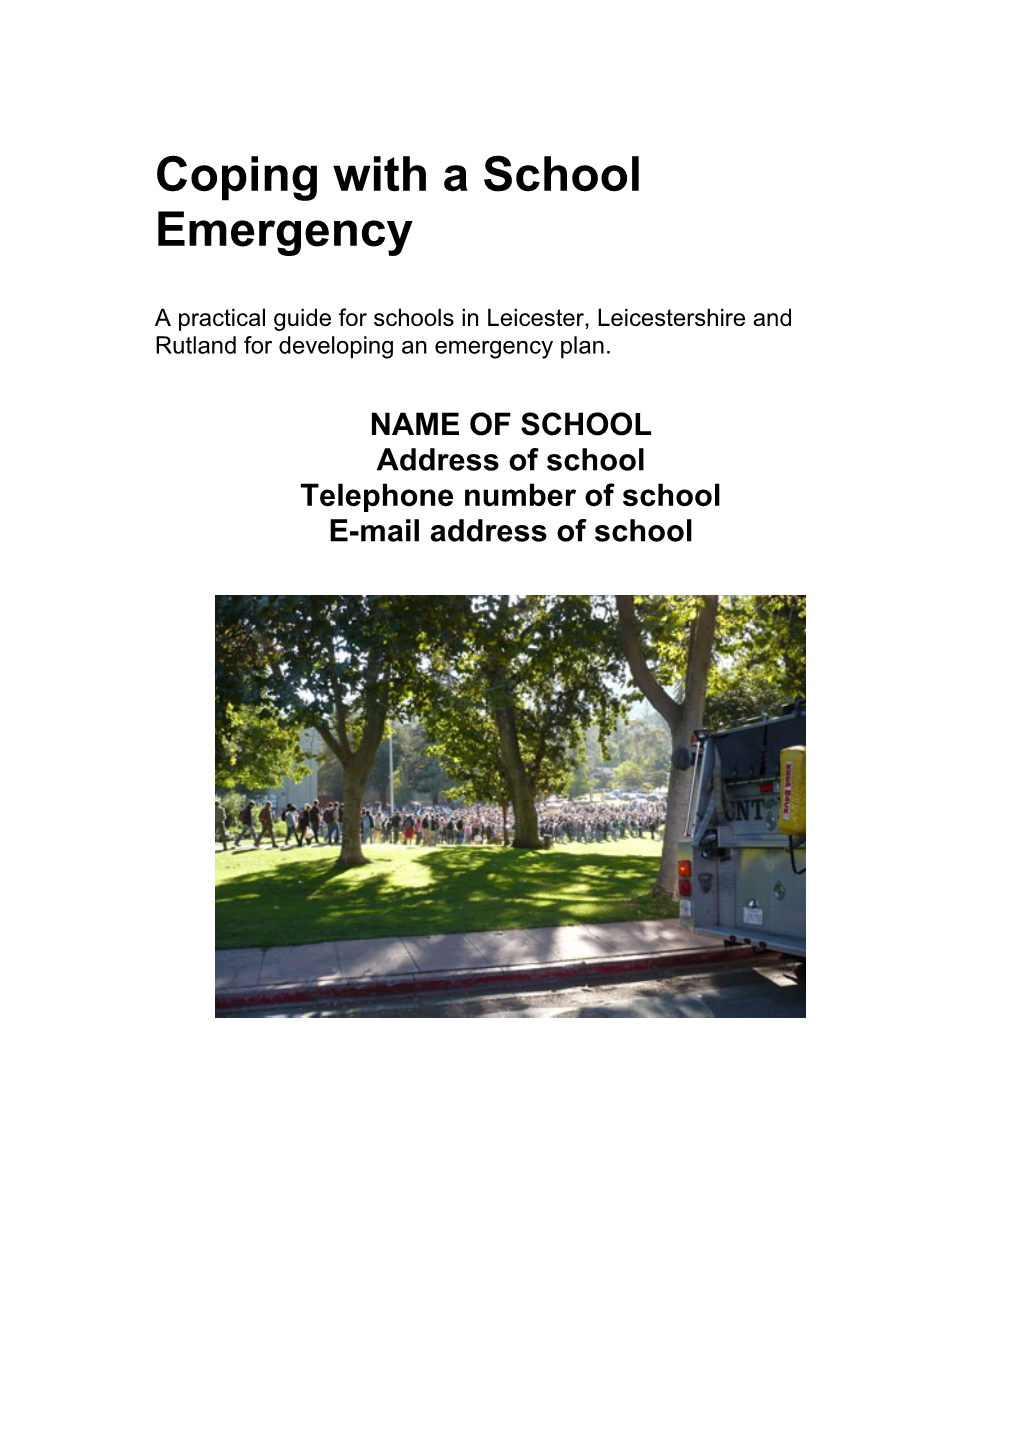 Coping with a School Emergency